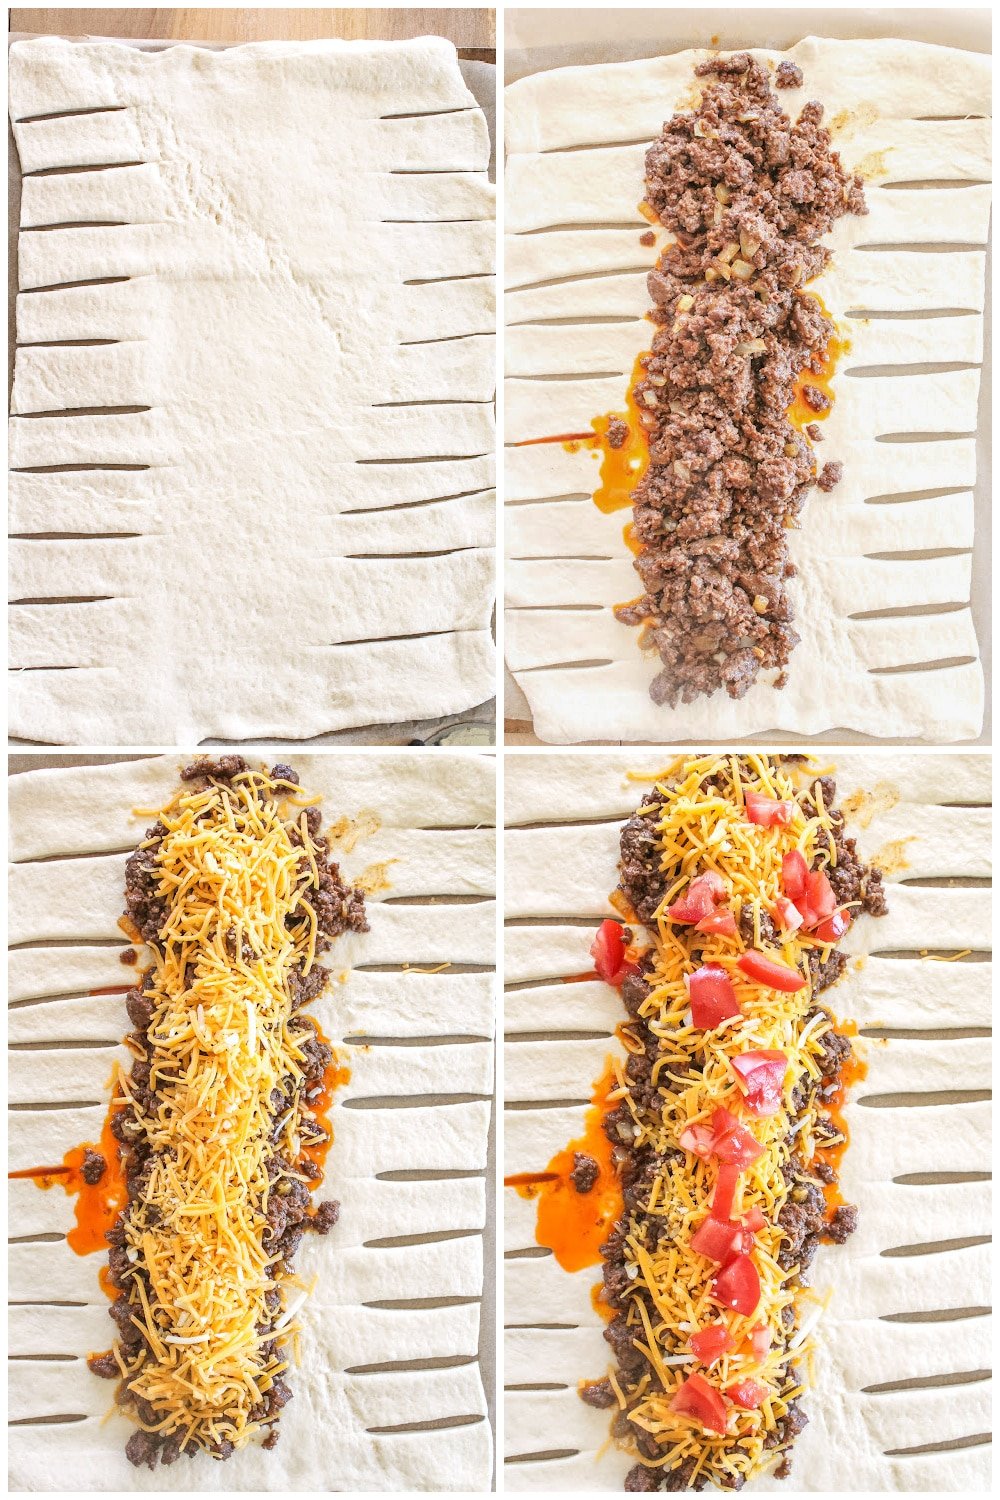 fill pizza dough with taco meat and toppings